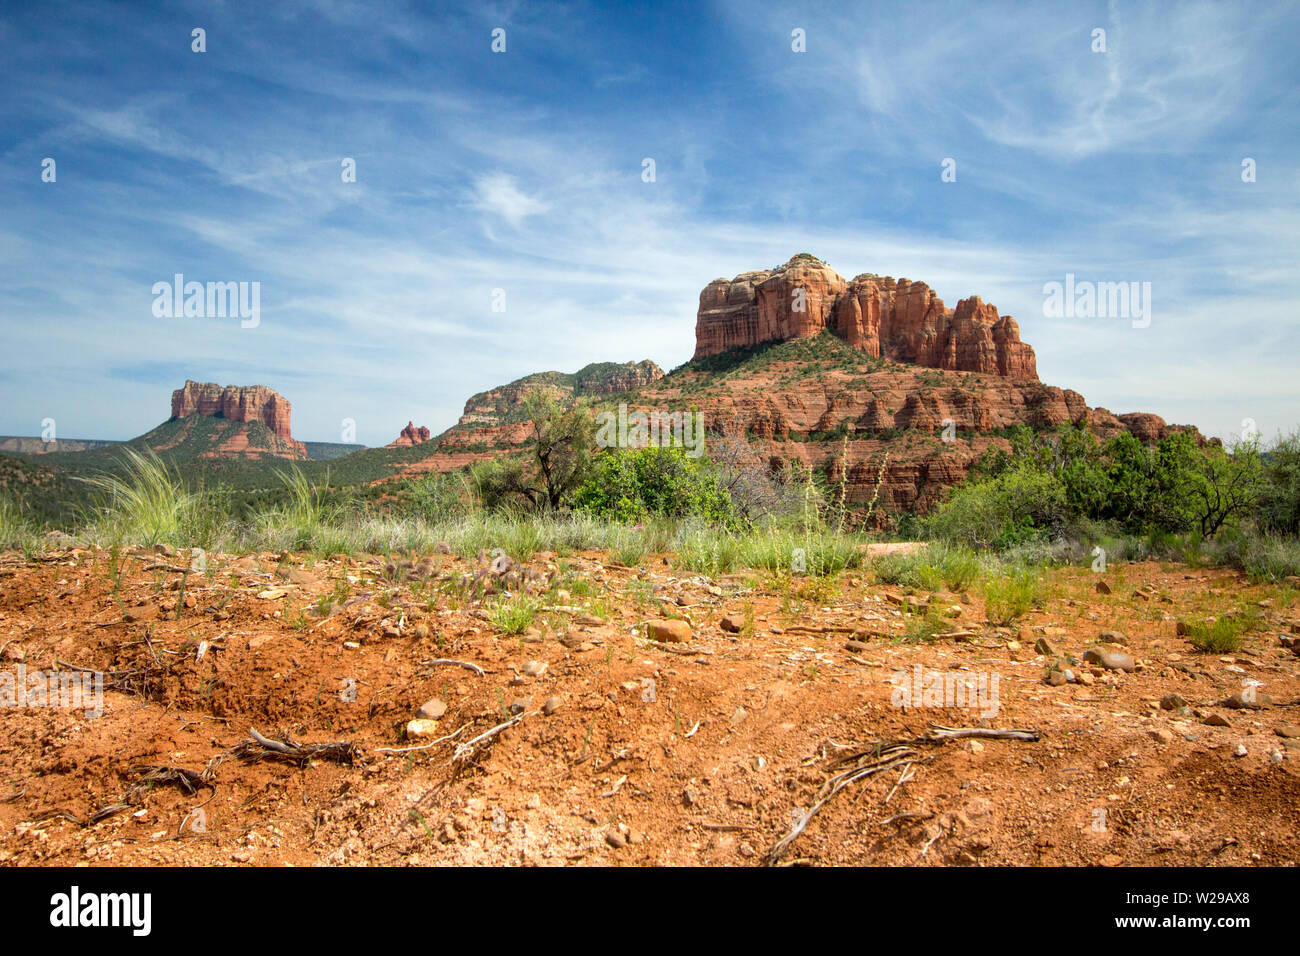 Red Rocks Of Sedona. Scenic Sedona, Arizona red rock landscape with the famous Courthouse and Bell mountain geological formations Stock Photo